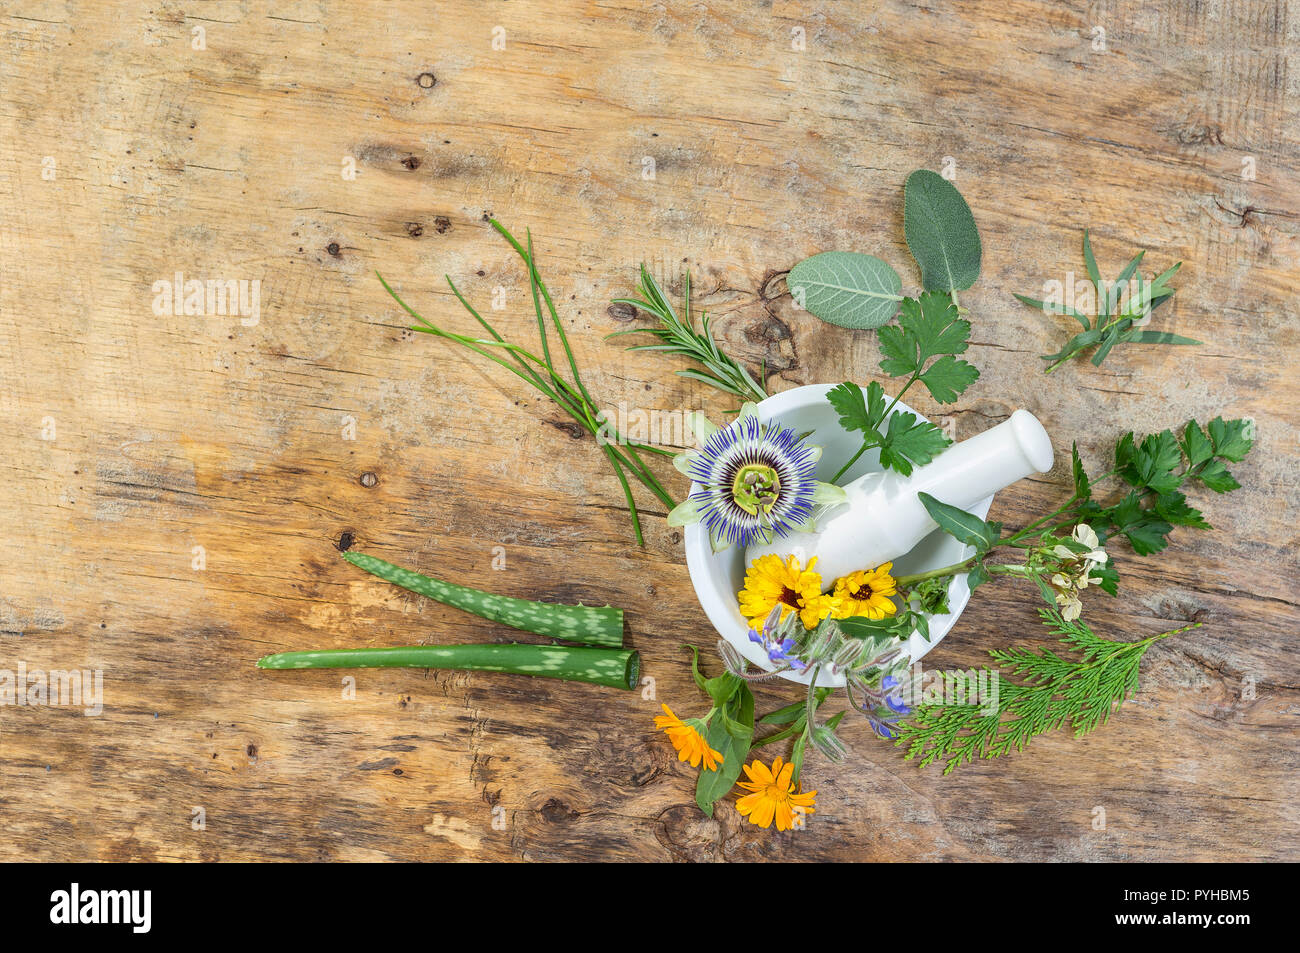 Herb leaf selection of golden thyme, oregano, purple sage, mint and rosemary in flower in a rustic olive wood mortar with pestle, isolated on wooden b Stock Photo